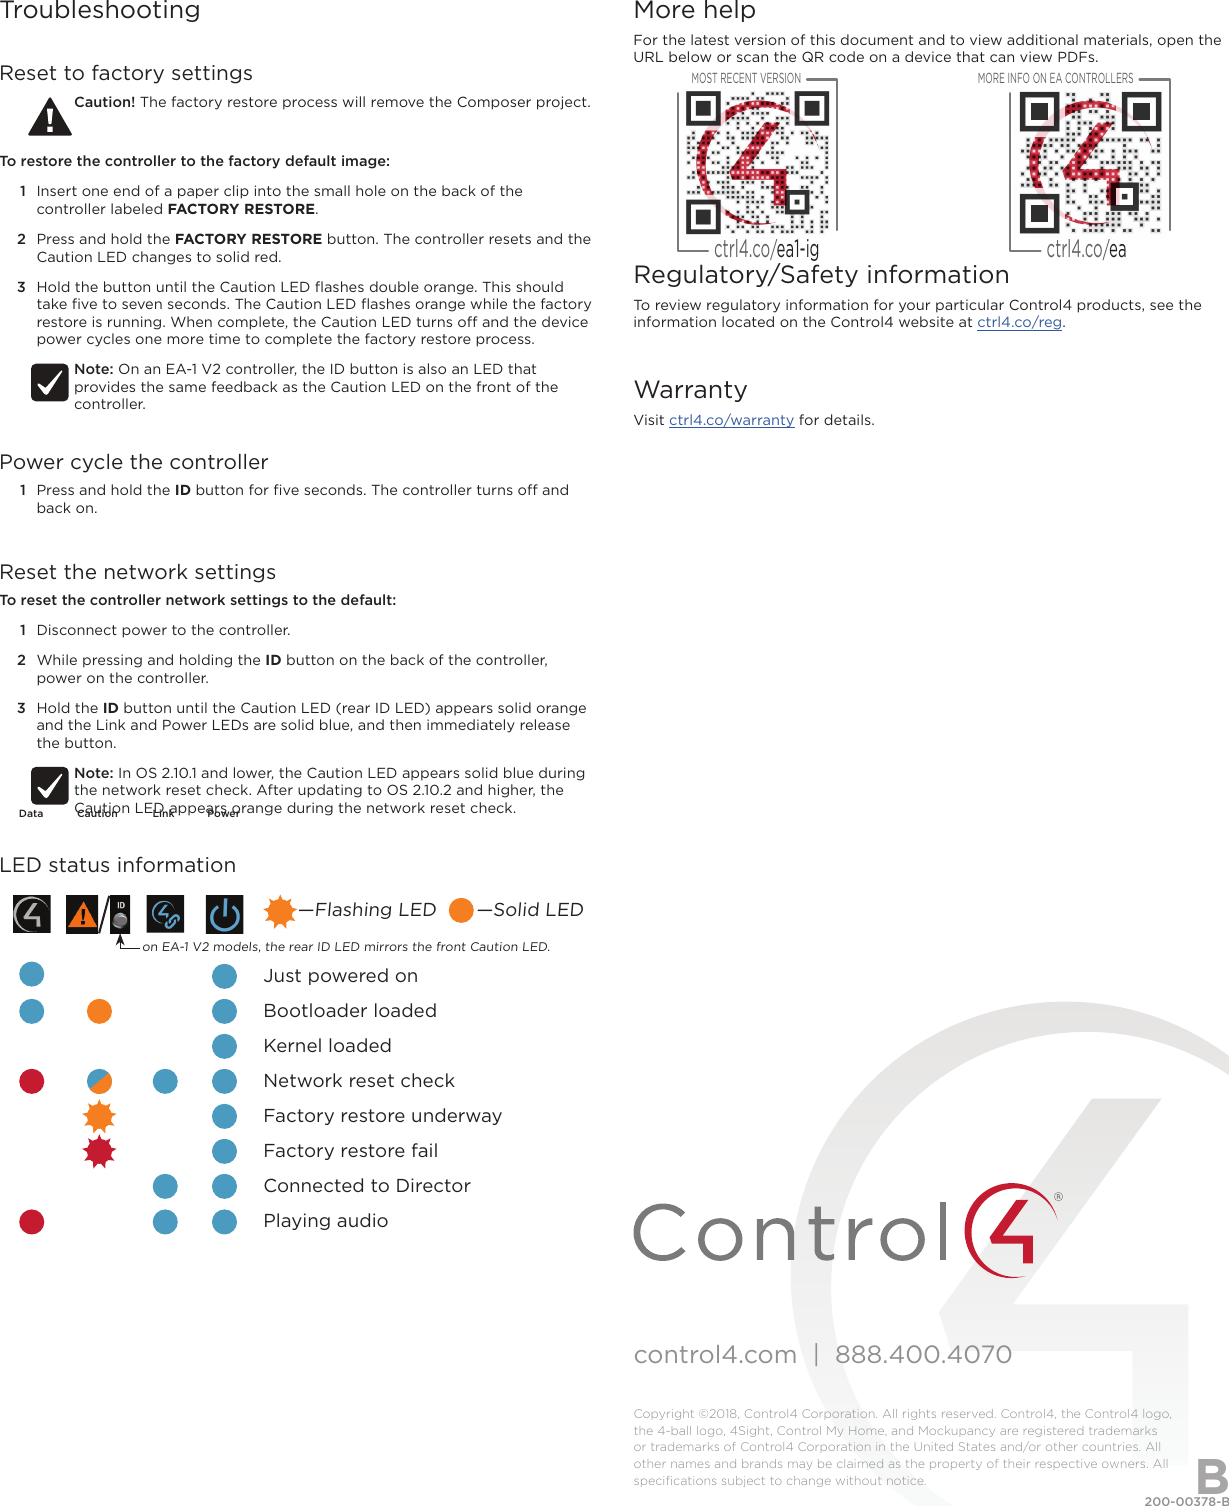 control4.com  |  888.400.4070Copyright ©2018, Control4 Corporation. All rights reserved. Control4, the Control4 logo, the 4-ball logo, 4Sight, Control My Home, and Mockupancy are registered trademarks or trademarks of Control4 Corporation in the United States and/or other countries. All other names and brands may be claimed as the property of their respective owners. All speciﬁcations subject to change without notice.More helpFor the latest version of this document and to view additional materials, open the URL below or scan the QR code on a device that can view PDFs.Regulatory/Safety informationTo review regulatory information for your particular Control4 products, see the information located on the Control4 website at ctrl4.co/reg.WarrantyVisit ctrl4.co/warranty for details.MOST RECENT VERSIONctrl4.co/ea1-igMORE INFO ON EA CONTROLLERSctrl4.co/ea200-00378-B  2018-07-19 DHBTroubleshootingReset to factory settingsCaution! The factory restore process will remove the Composer project.To restore the controller to the factory default image:1  Insert one end of a paper clip into the small hole on the back of the controller labeled FACTORY RESTORE.2  Press and hold the FACTORY RESTORE button. The controller resets and the Caution LED changes to solid red.3  Hold the button until the Caution LED ﬂashes double orange. This should take ﬁve to seven seconds. The Caution LED ﬂashes orange while the factory restore is running. When complete, the Caution LED turns o and the device power cycles one more time to complete the factory restore process.Note: On an EA-1 V2 controller, the ID button is also an LED that provides the same feedback as the Caution LED on the front of the controller.Power cycle the controller1  Press and hold the ID button for ﬁve seconds. The controller turns o and back on.Reset the network settingsTo reset the controller network settings to the default: 1  Disconnect power to the controller.2  While pressing and holding the ID button on the back of the controller, power on the controller.3  Hold the ID button until the Caution LED (rear ID LED) appears solid orange and the Link and Power LEDs are solid blue, and then immediately release the button.Note: In OS 2.10.1 and lower, the Caution LED appears solid blue during the network reset check. After updating to OS 2.10.2 and higher, the Caution LED appears orange during the network reset check.LED status information             Just powered on             Bootloader loaded             Kernel loaded             Network reset check             Factory restore underway             Factory restore fail             Connected to Director             Playing audio—Flashing LED       —Solid LEDon EA-1 V2 models, the rear ID LED mirrors the front Caution LED.Data Caution Link Power